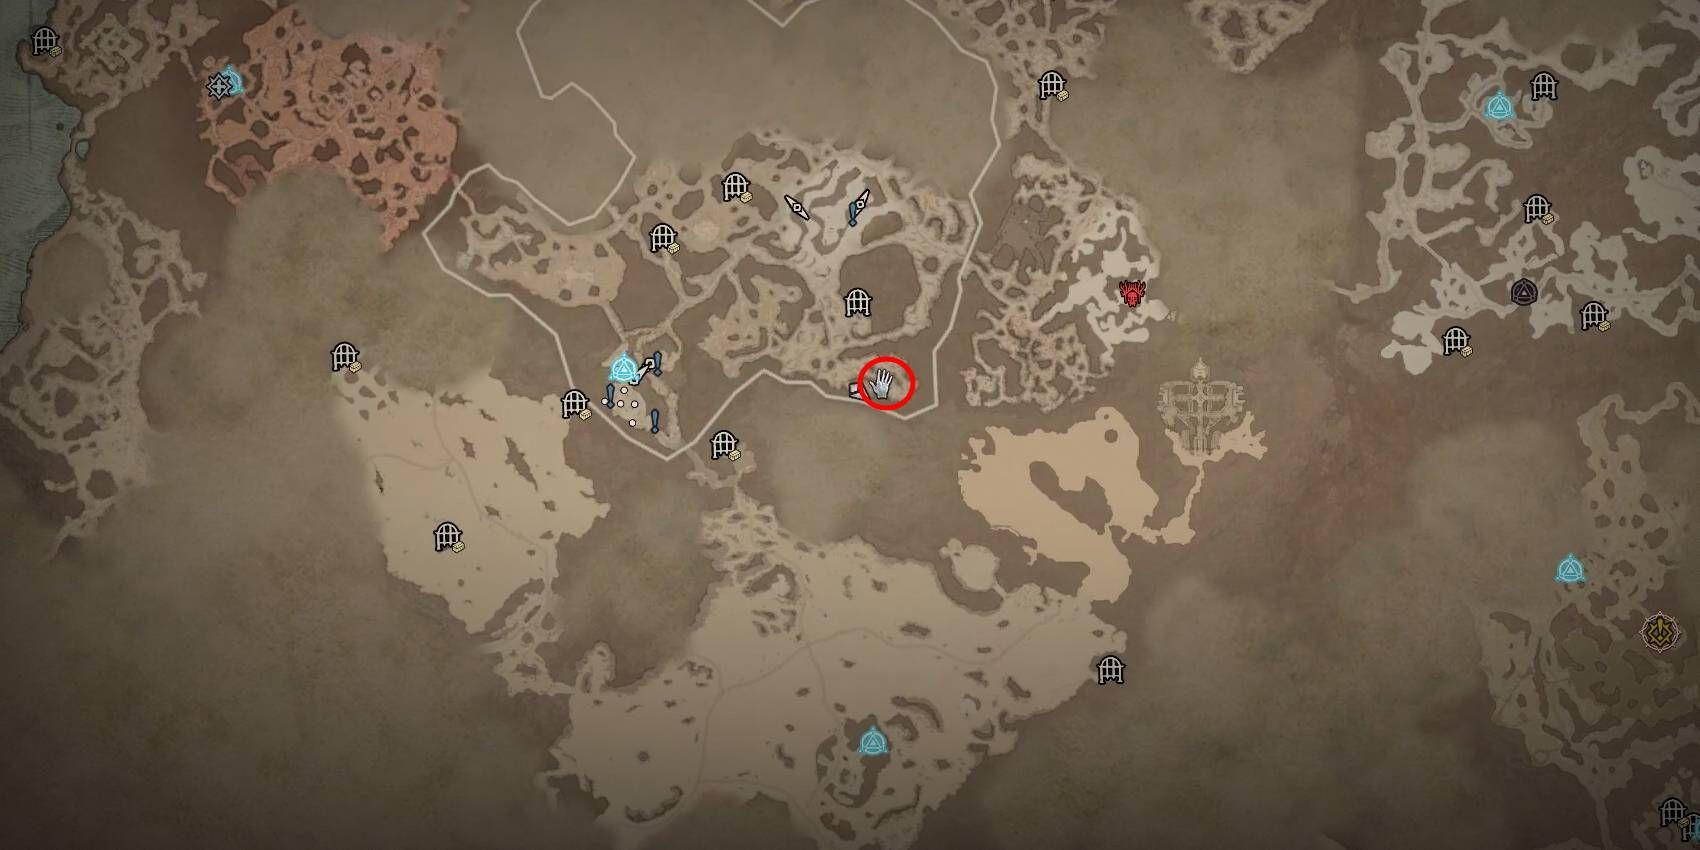 Diablo 4 Zarozar the Mighty Rare Elite Location Marked in Red Circle on map